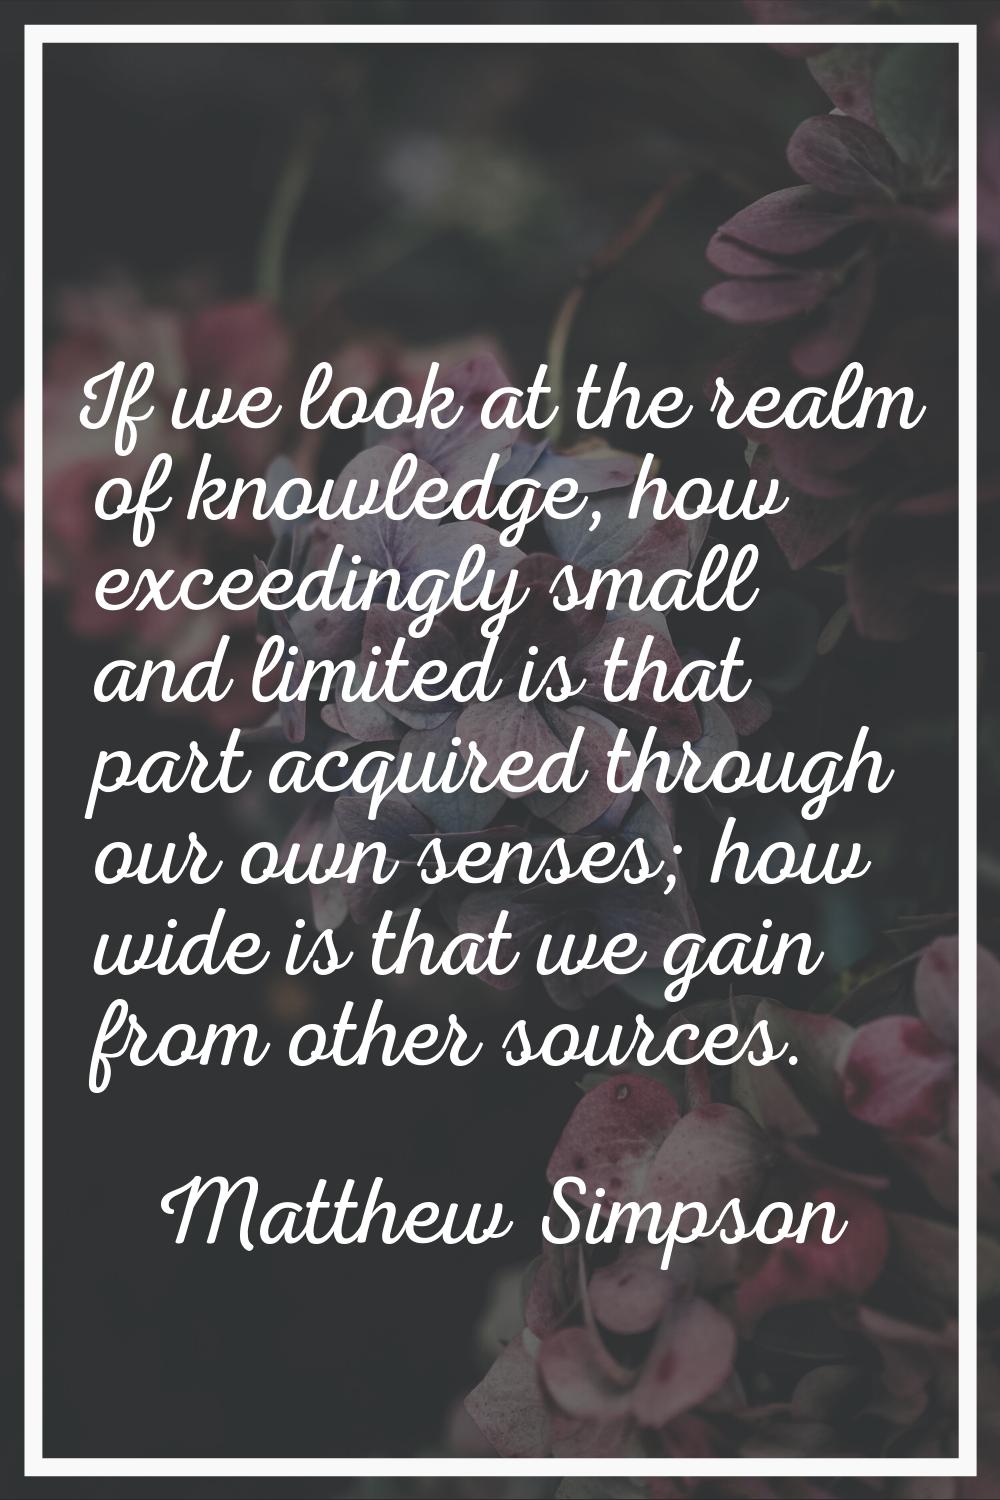 If we look at the realm of knowledge, how exceedingly small and limited is that part acquired throu